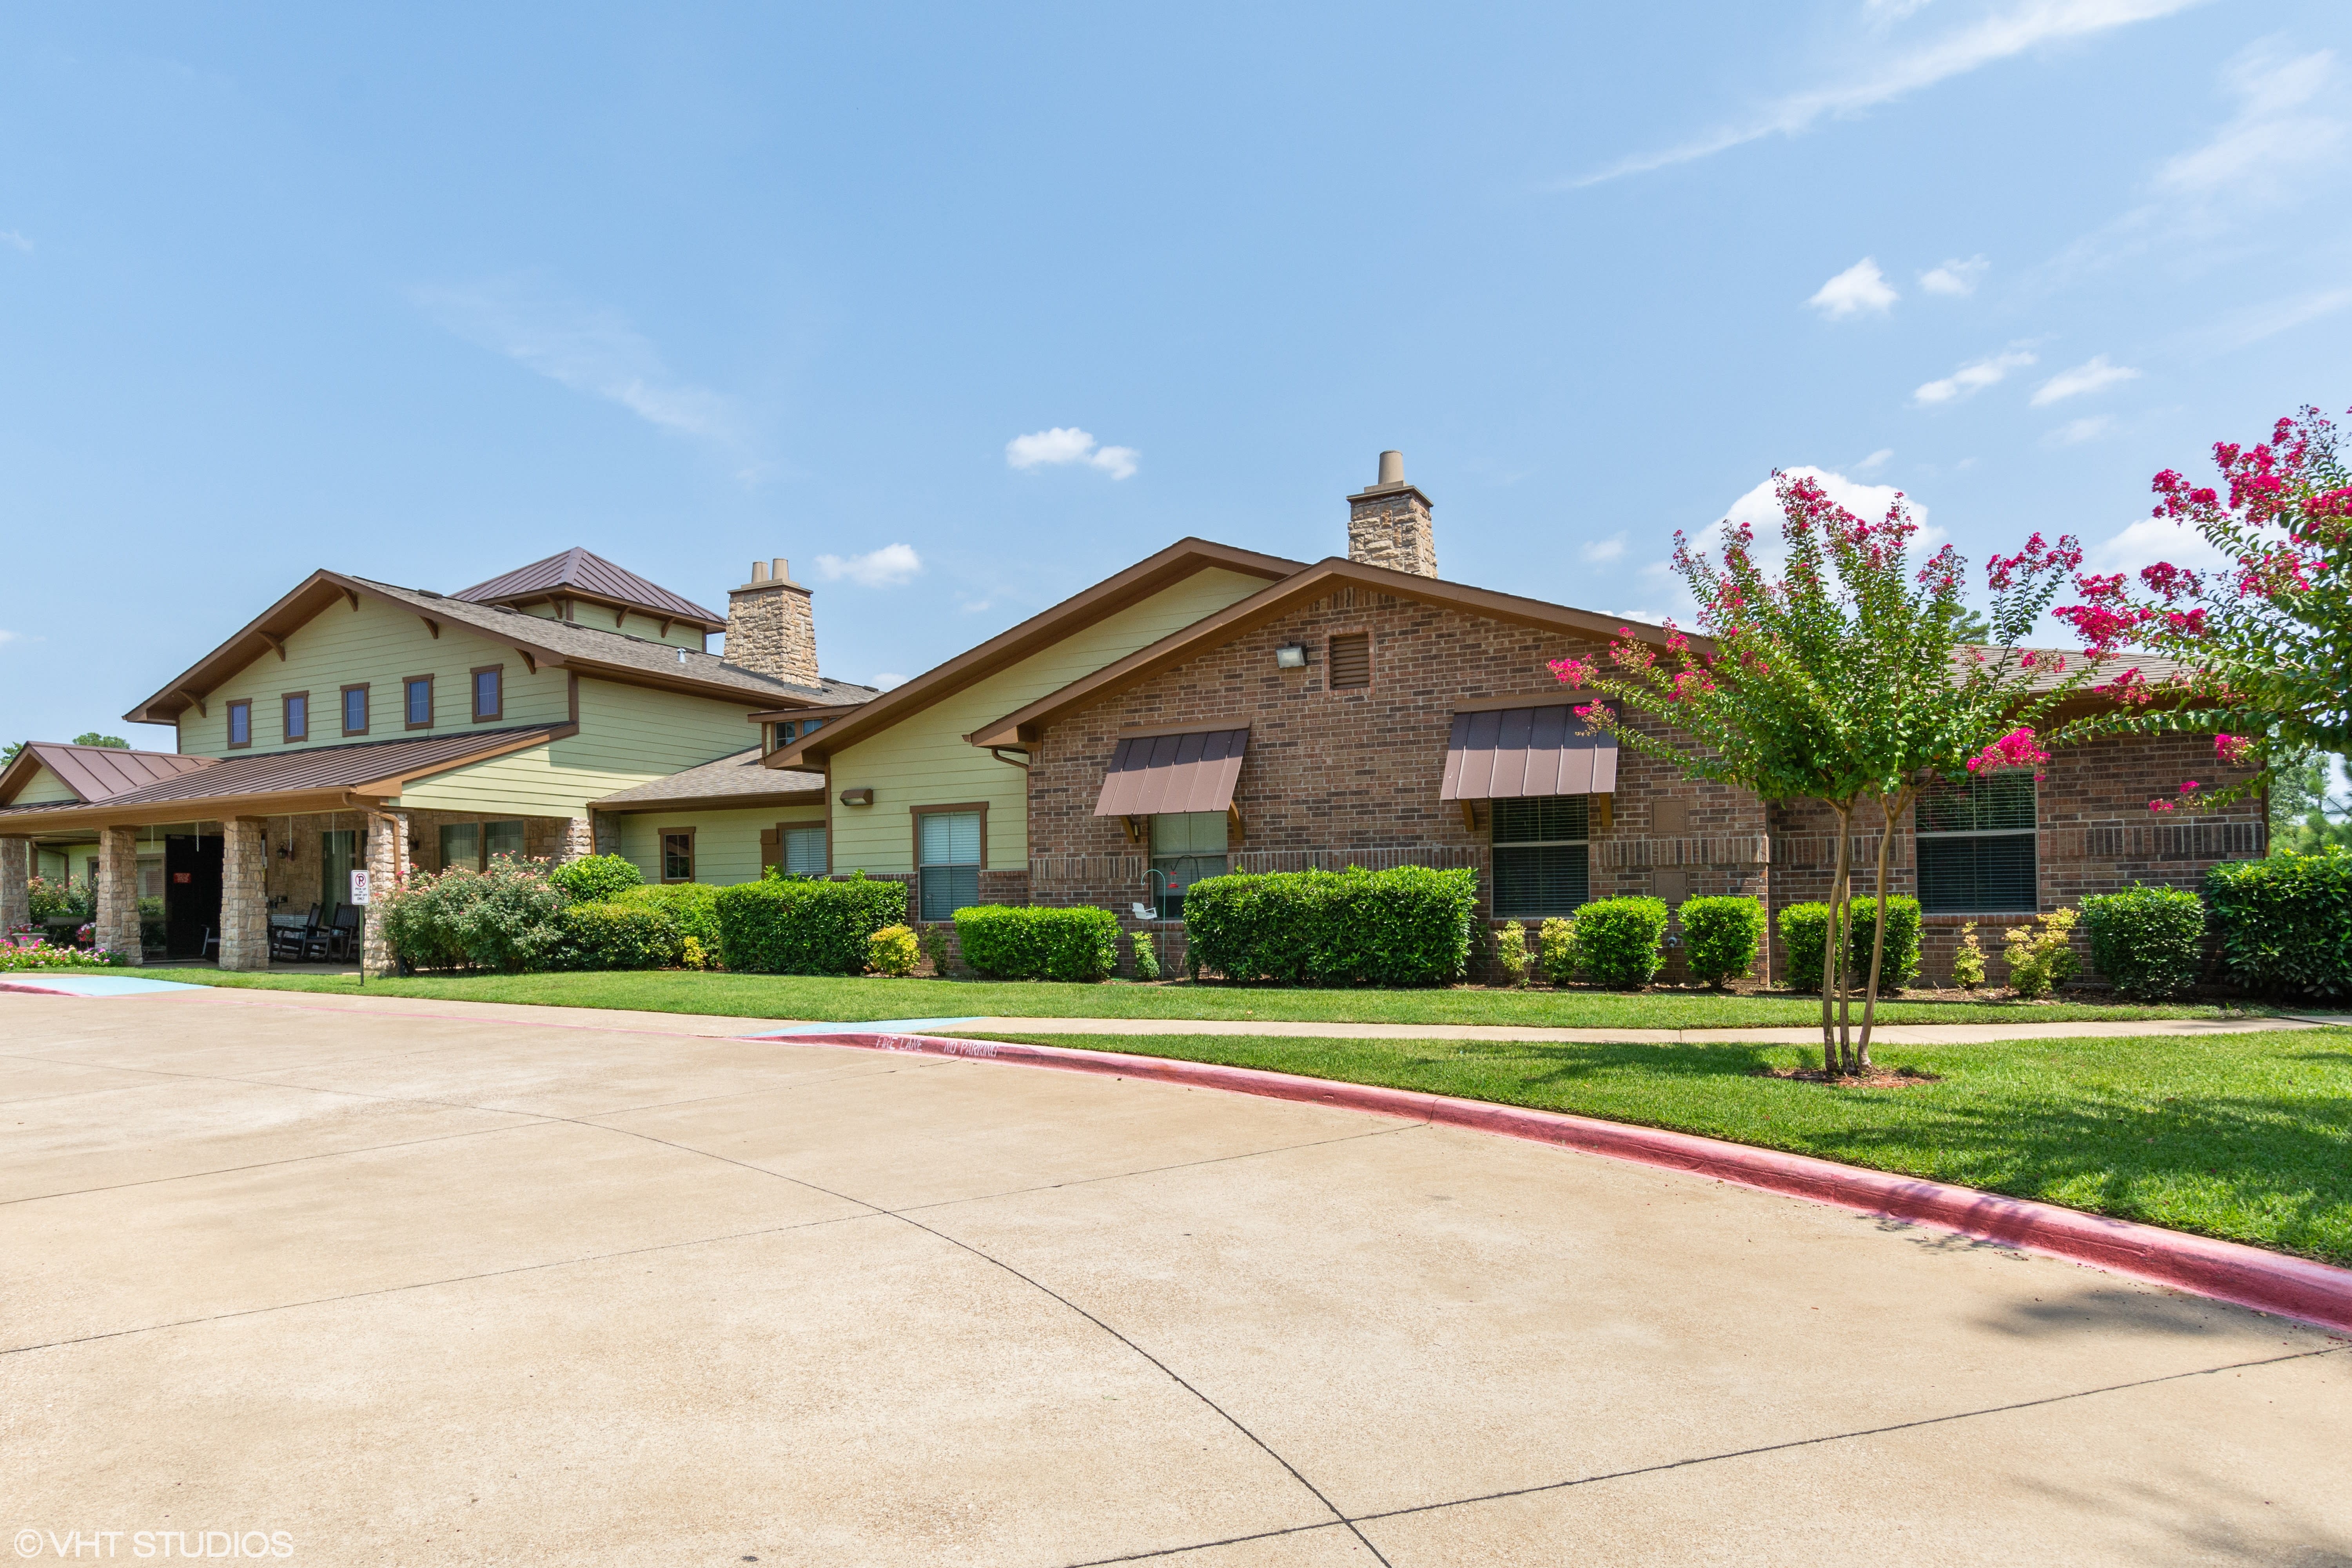 Azalea Trails Assisted Living and Memory Care | Tyler, TX 75703 | 35 reviews